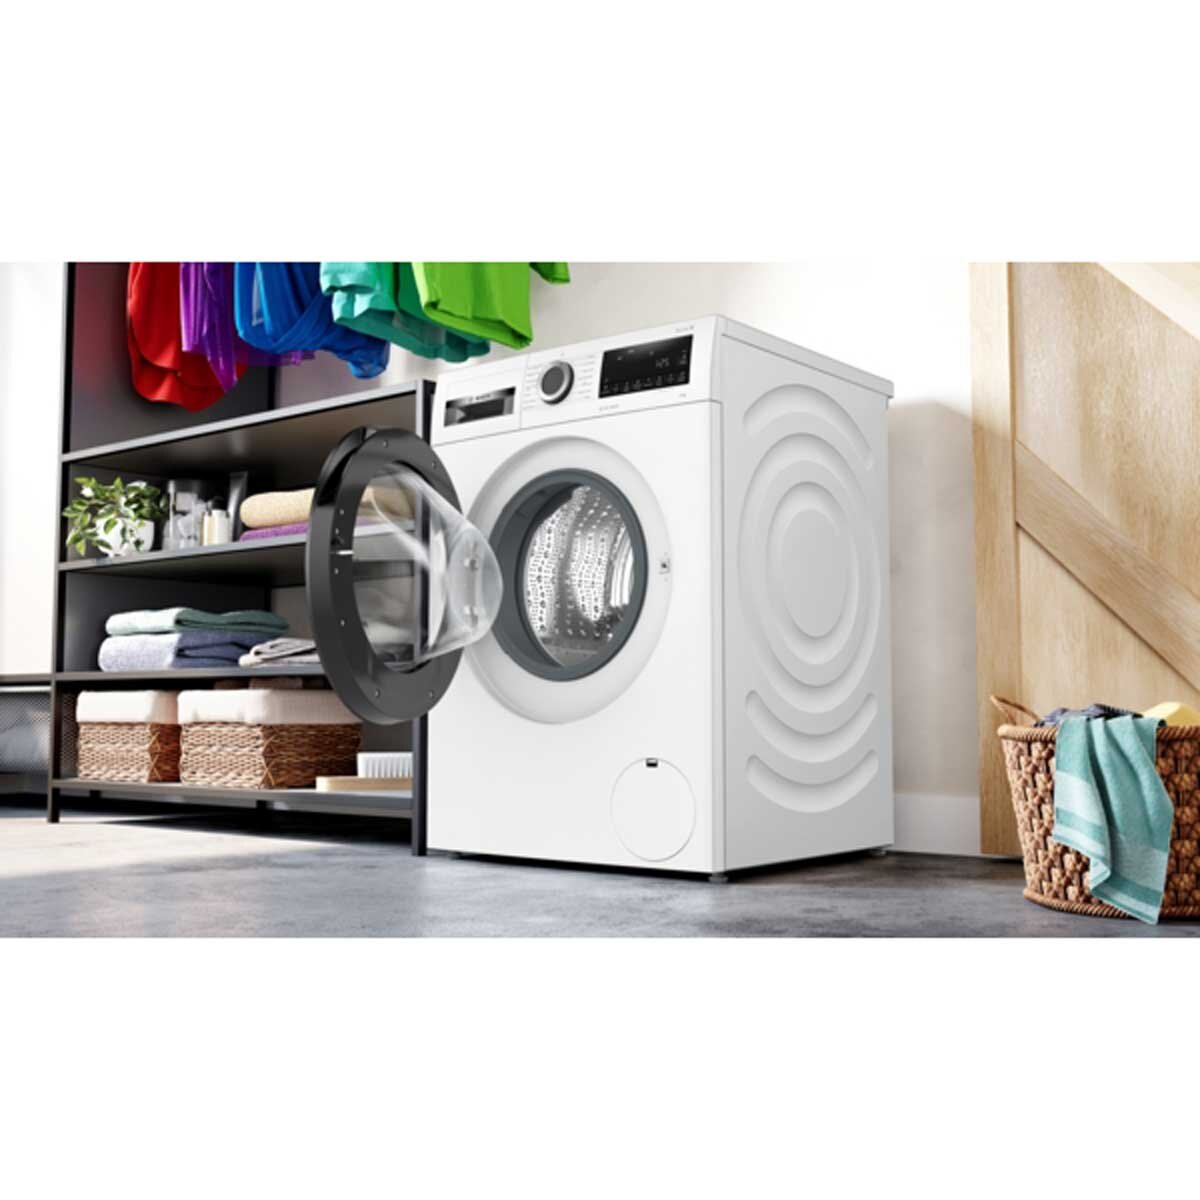 Bosch WGG24400GB Series 6, 9kg, 1400rpm Washing Machine, A Rated in White